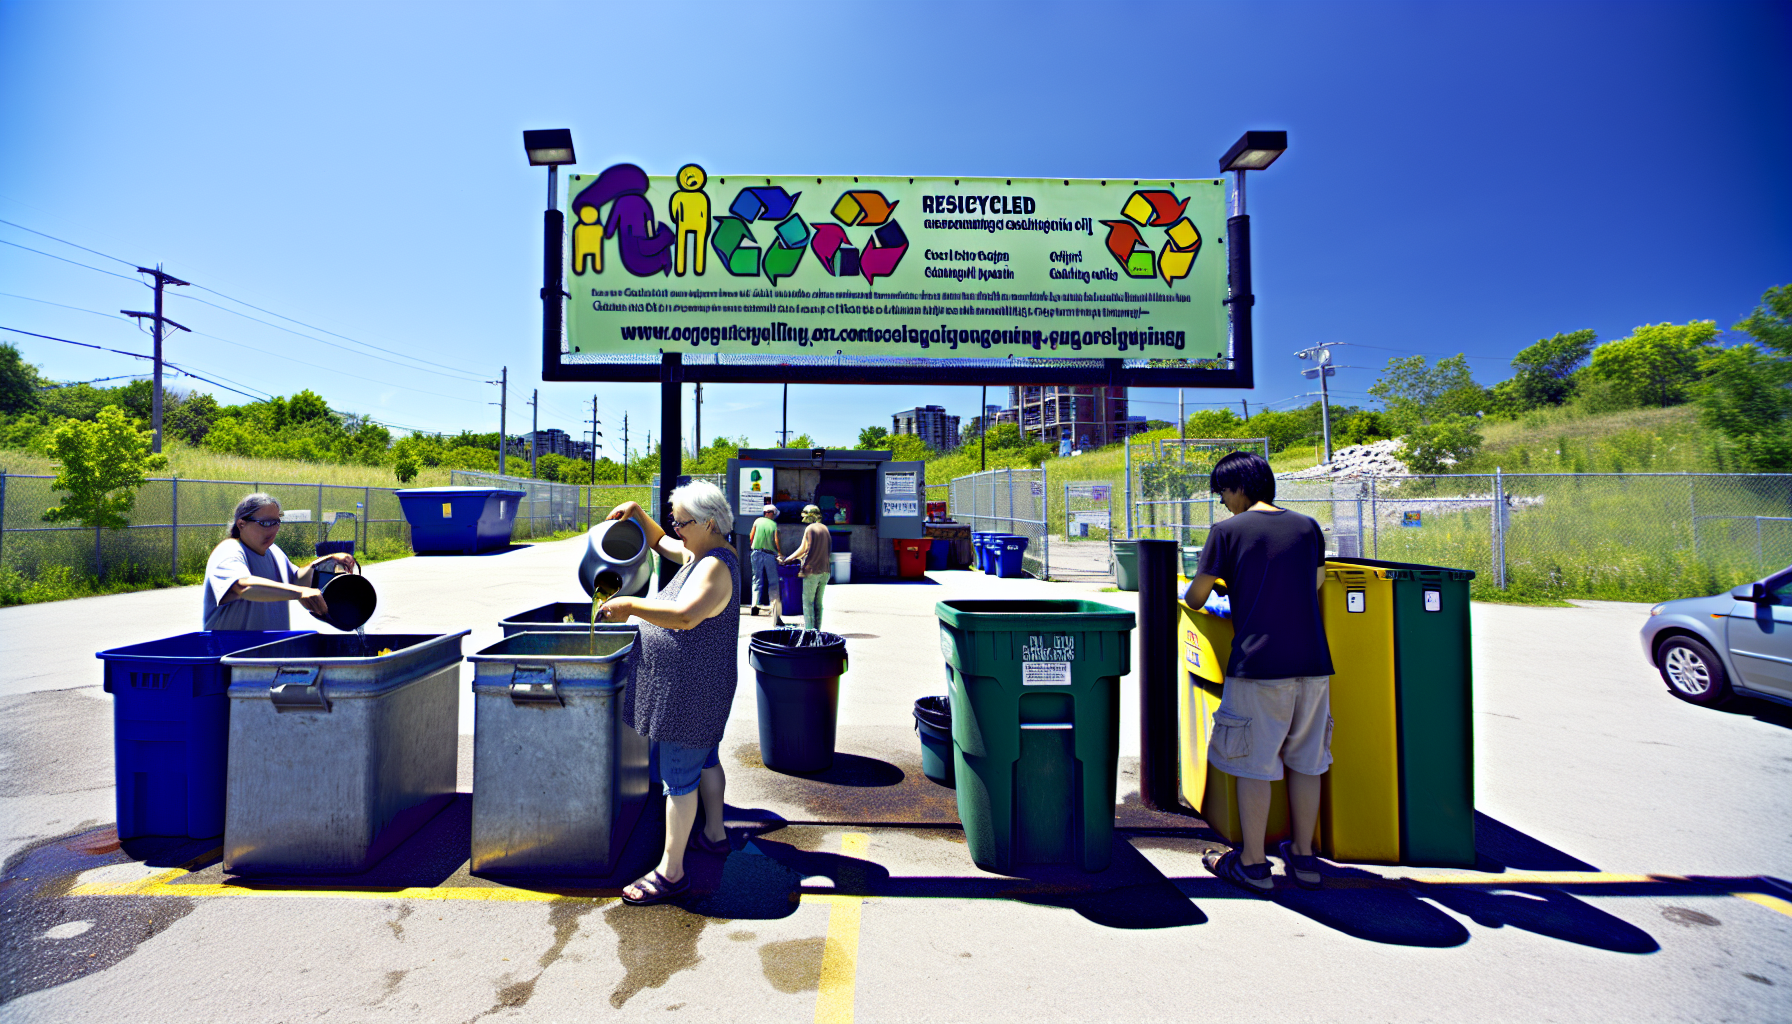 Local recycling center for used cooking oil disposal